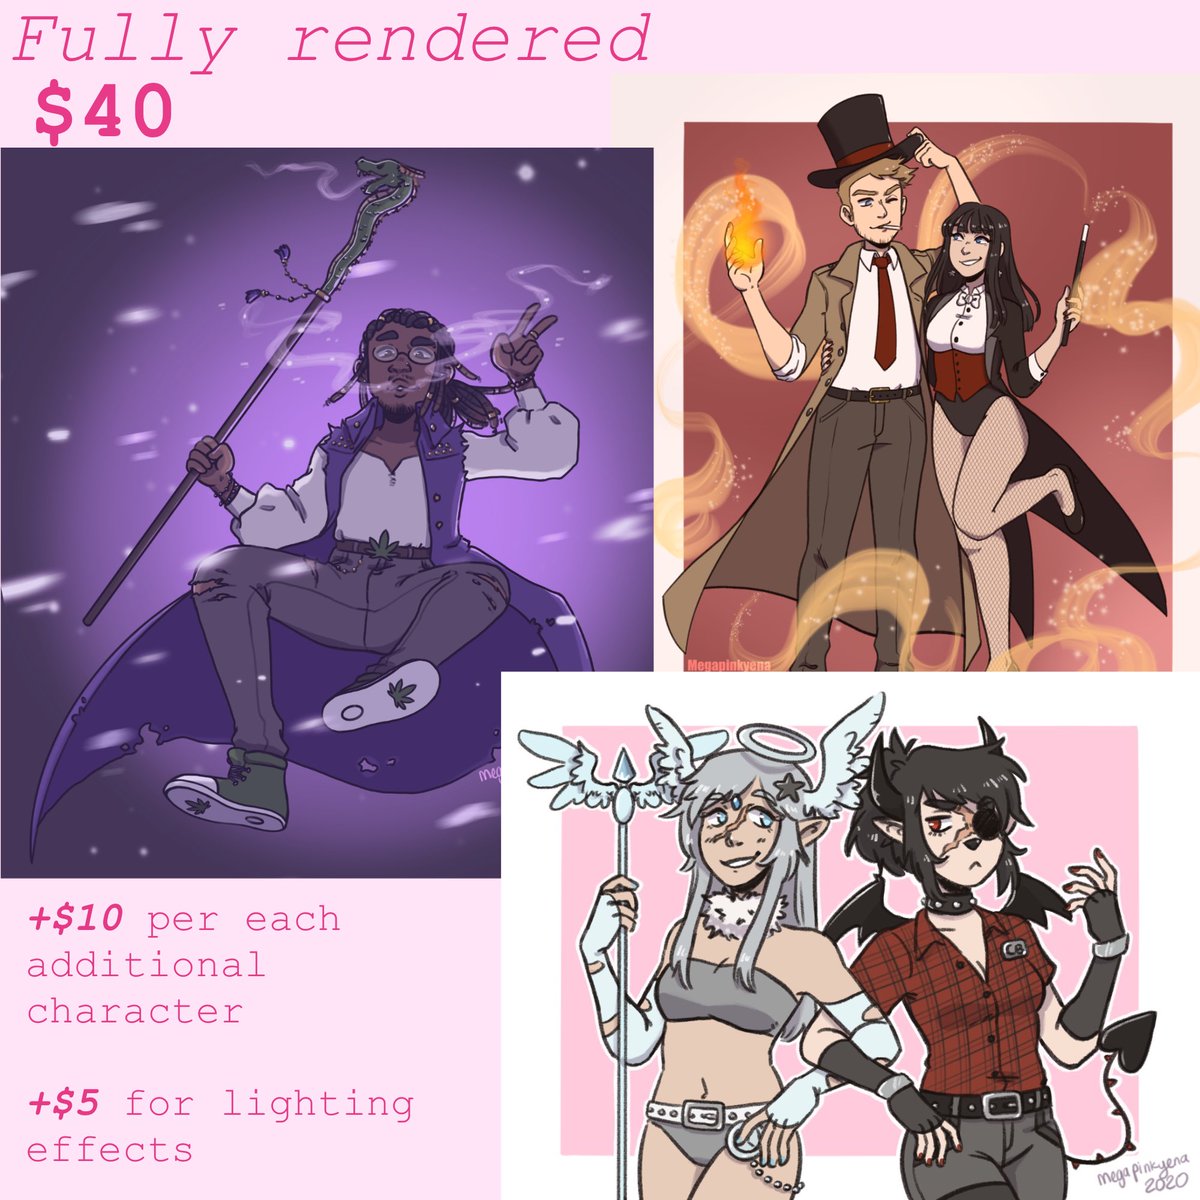 ‼️COMMISSIONS OPEN‼️
I can show additional artwork samples if needed.
DM or email me if you are interested. :)

Email: megapinkyena@gmail.com
Instagram: megapinkyena
Patreon: MegaPinkyena 